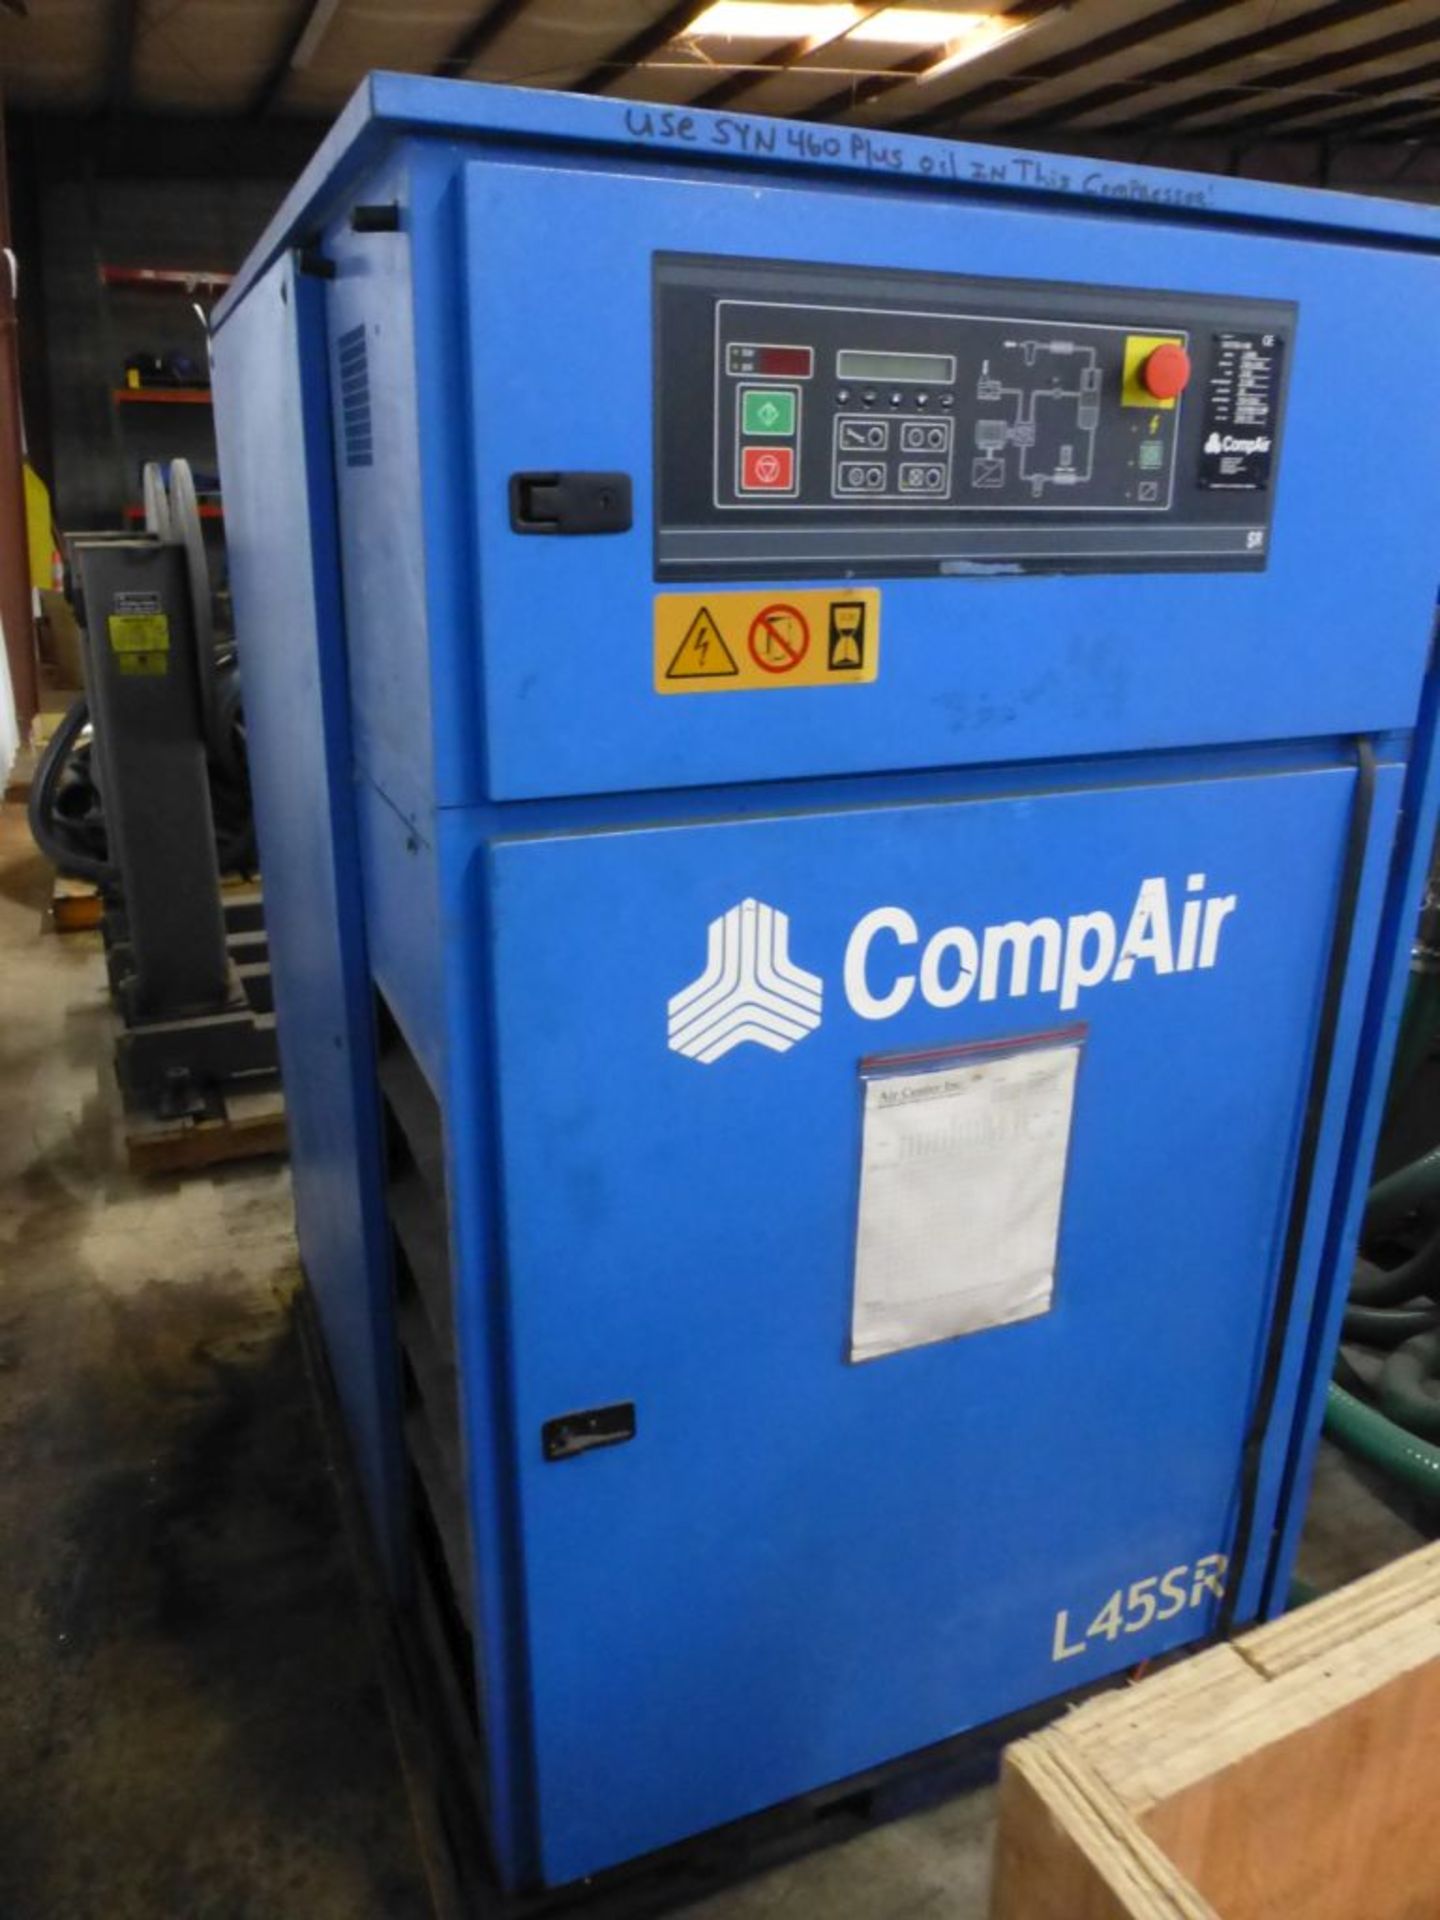 2002 Compair LH5SR 67 HP Speed Regulated Rotary Screw Air Compressor | Model No. LH5SR; 13 Bar - Image 2 of 8